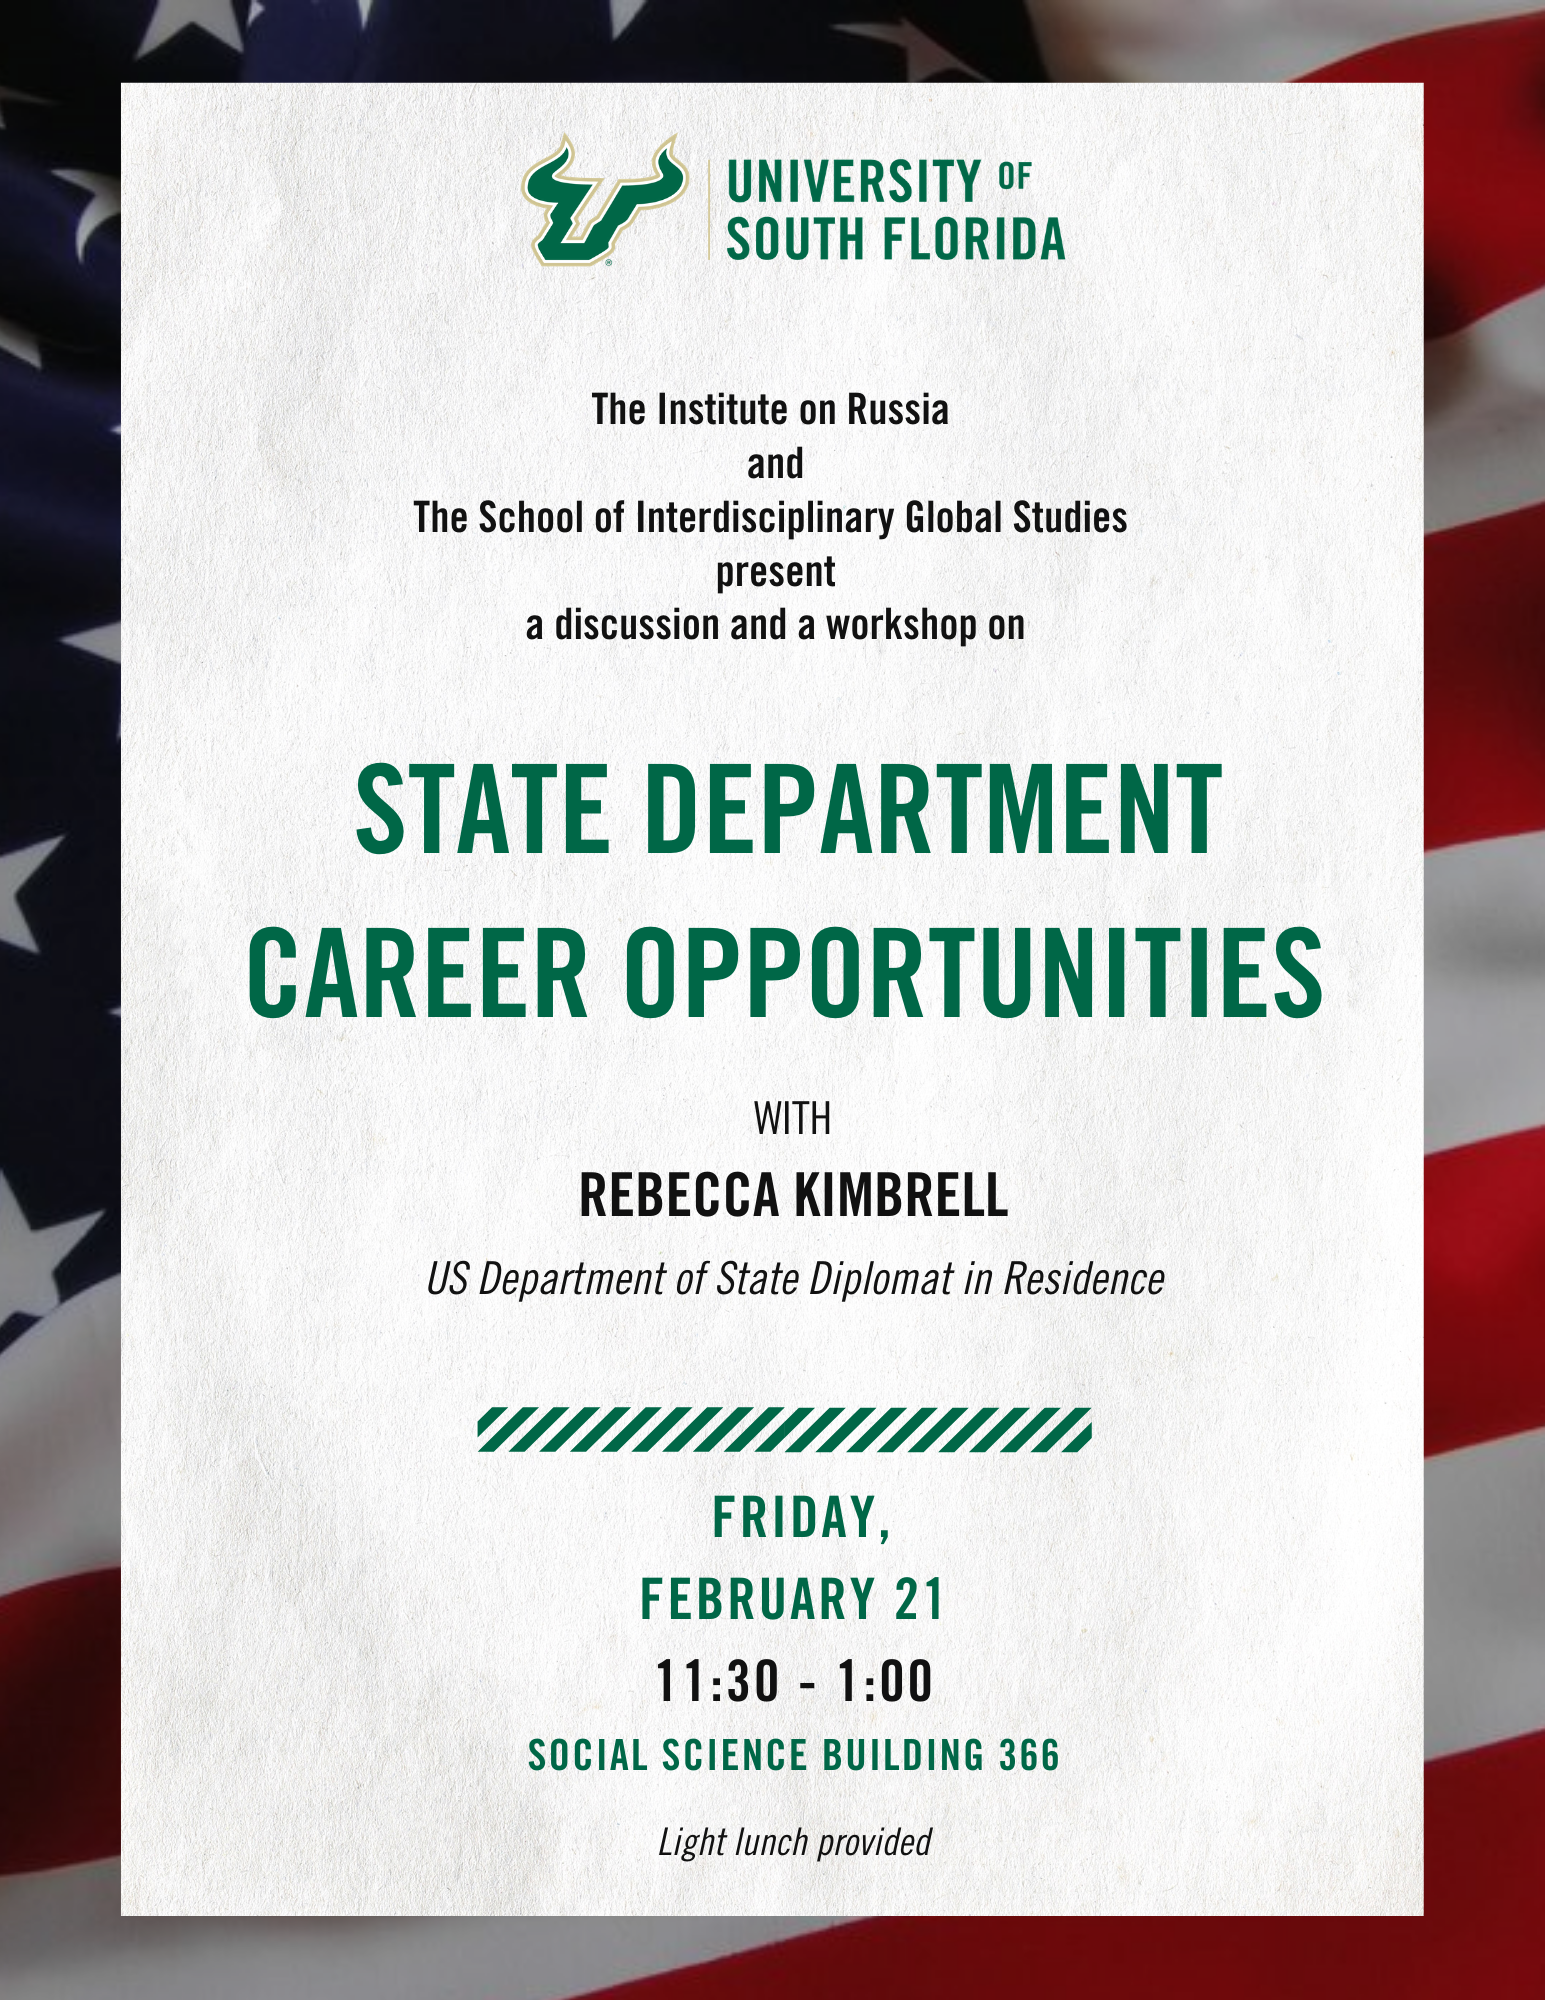 State Department Careers event flyer